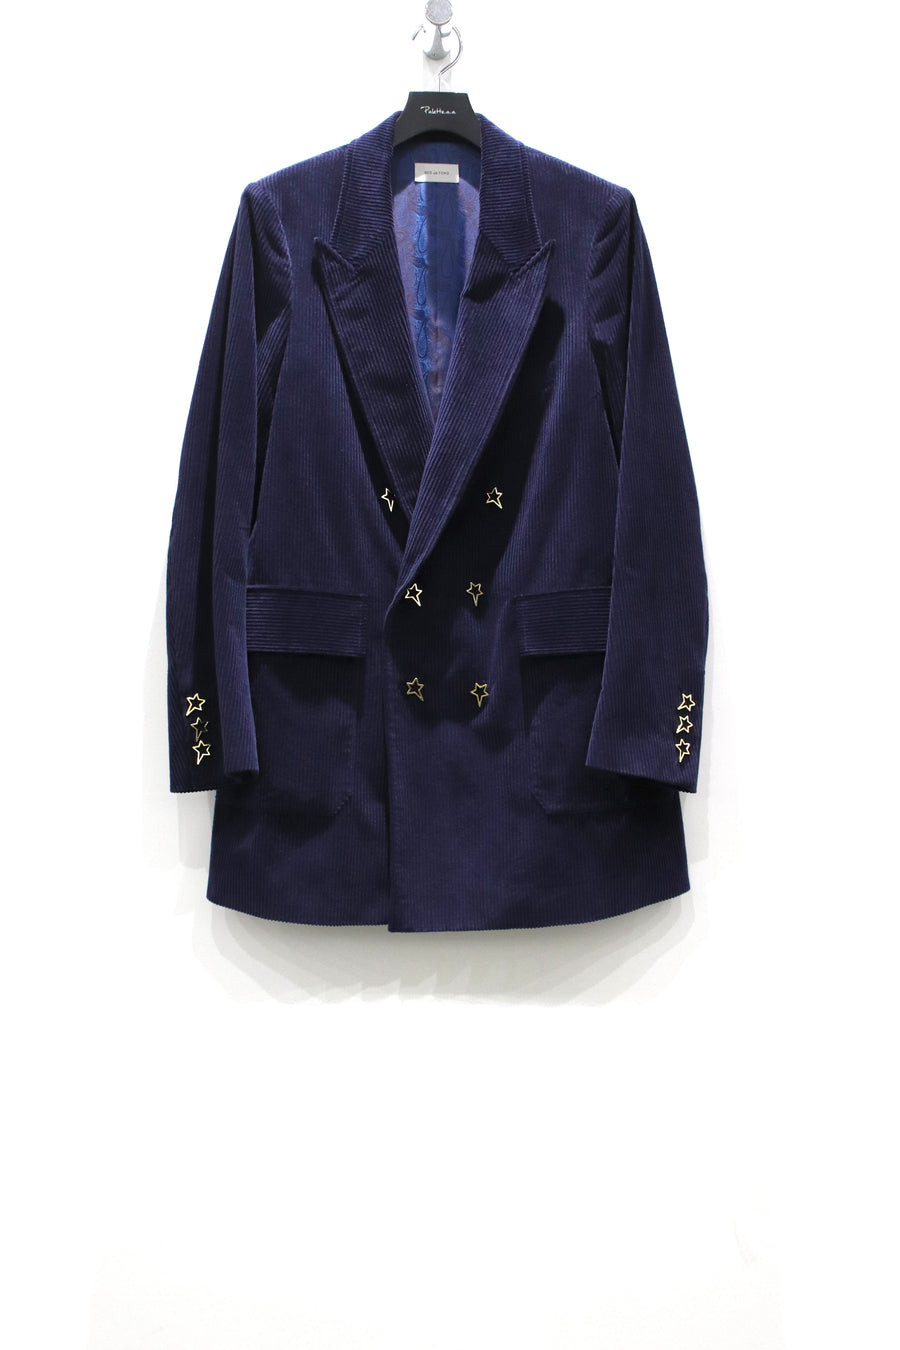 BED J.W. FORD(ベッドフォード)のDouble-Breasted Jacketの通販